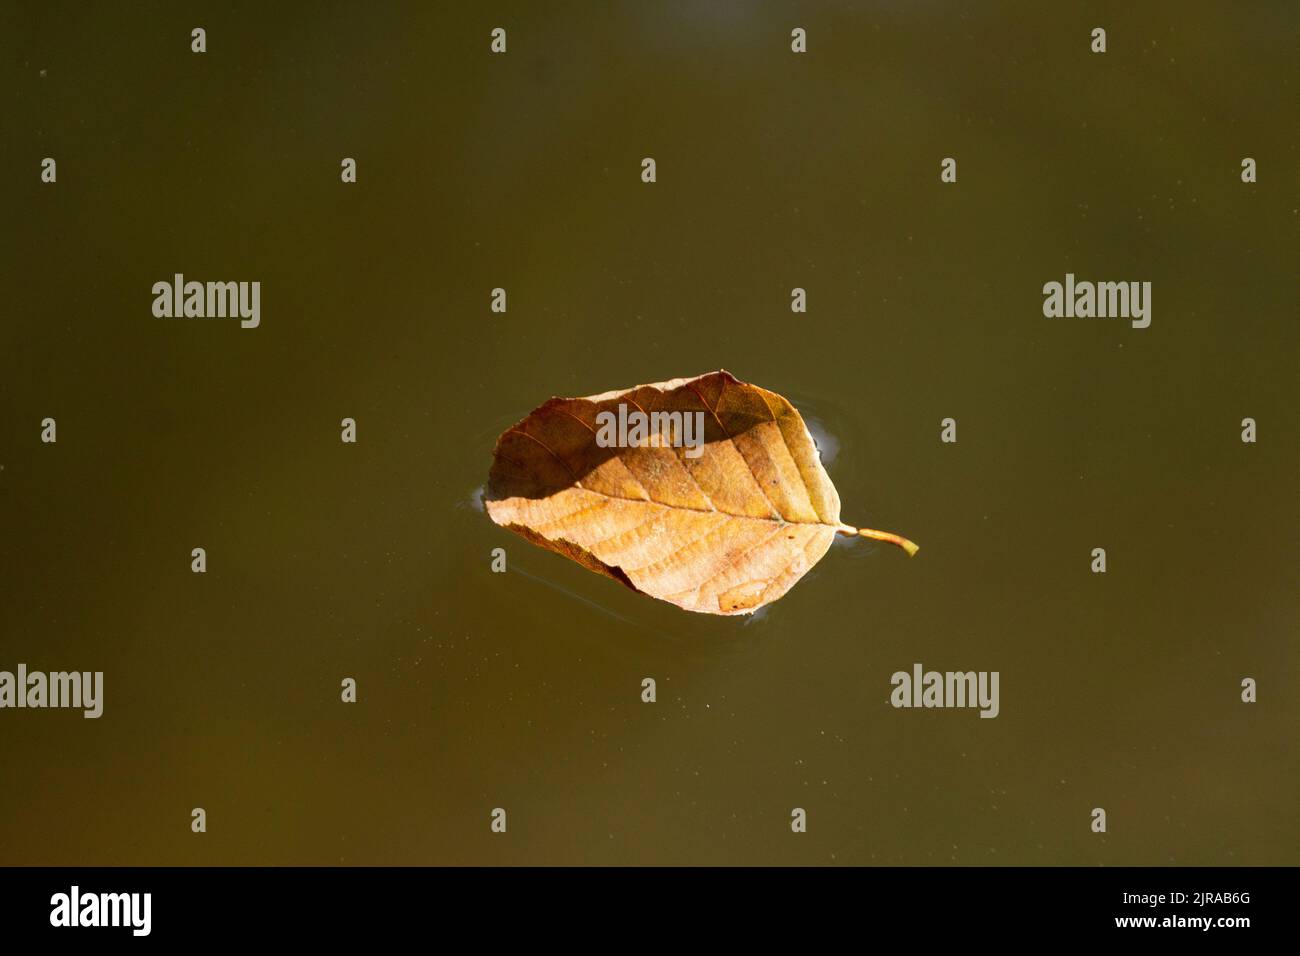 A close up view of a dead leaf that has fallen into the lake Stock Photo